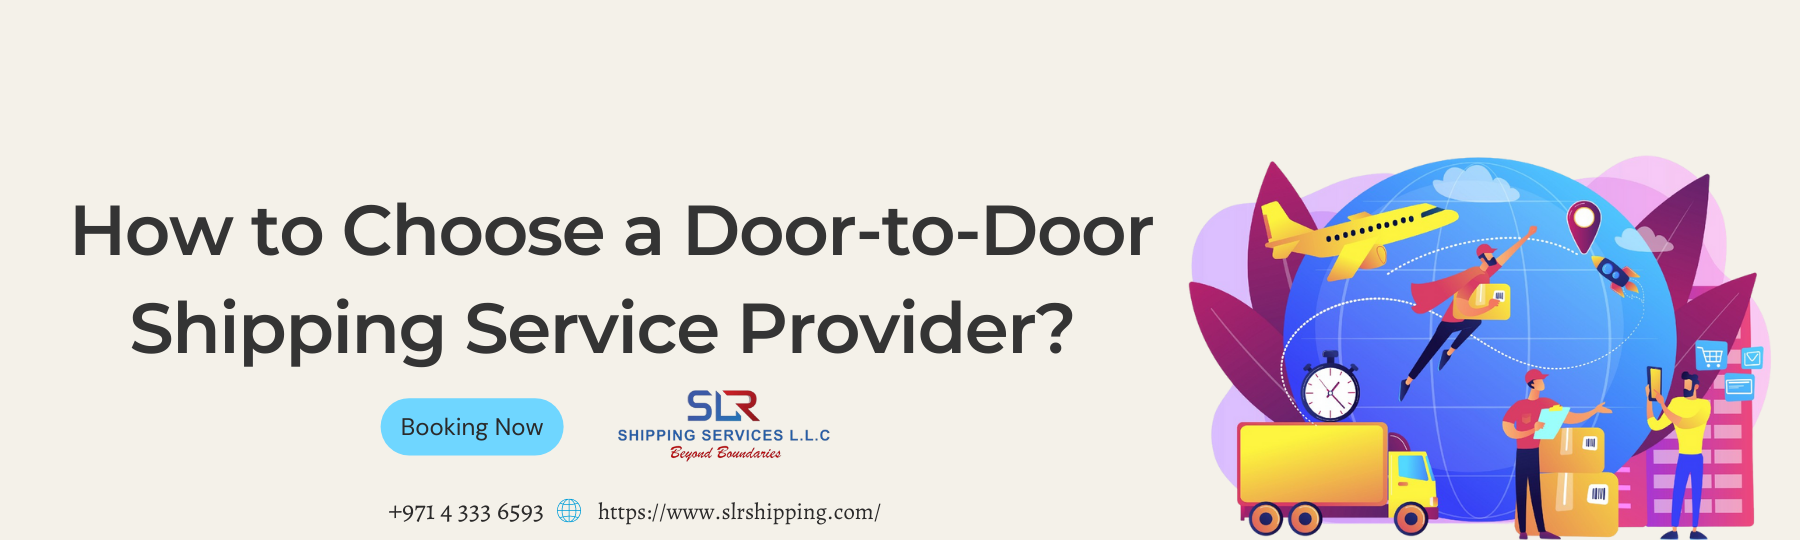 How to Choose a Door-to-Door Shipping Service Provider in Moscow Russia?